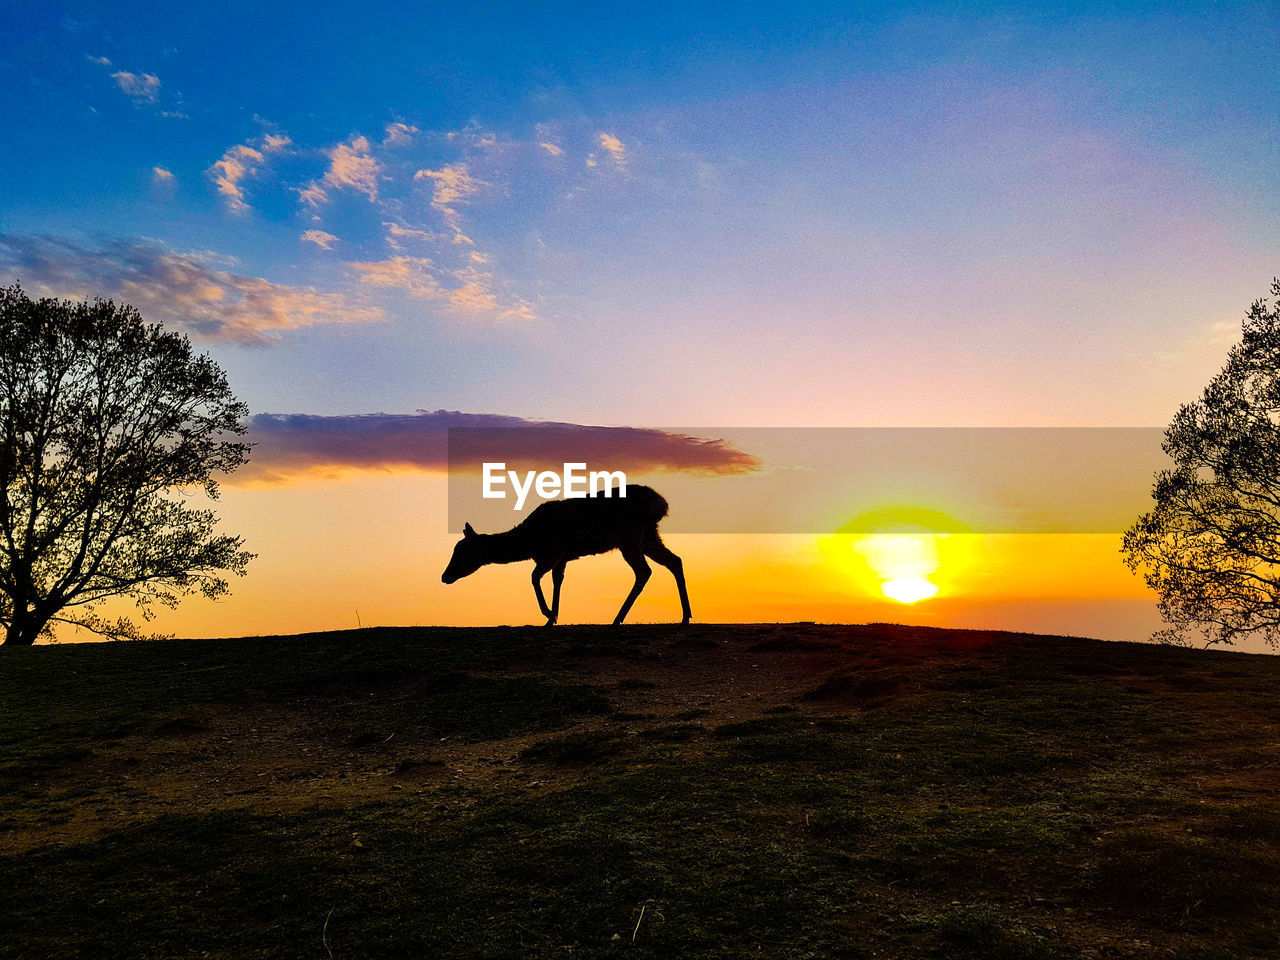 SILHOUETTE OF HORSE ON FIELD AGAINST SKY DURING SUNSET